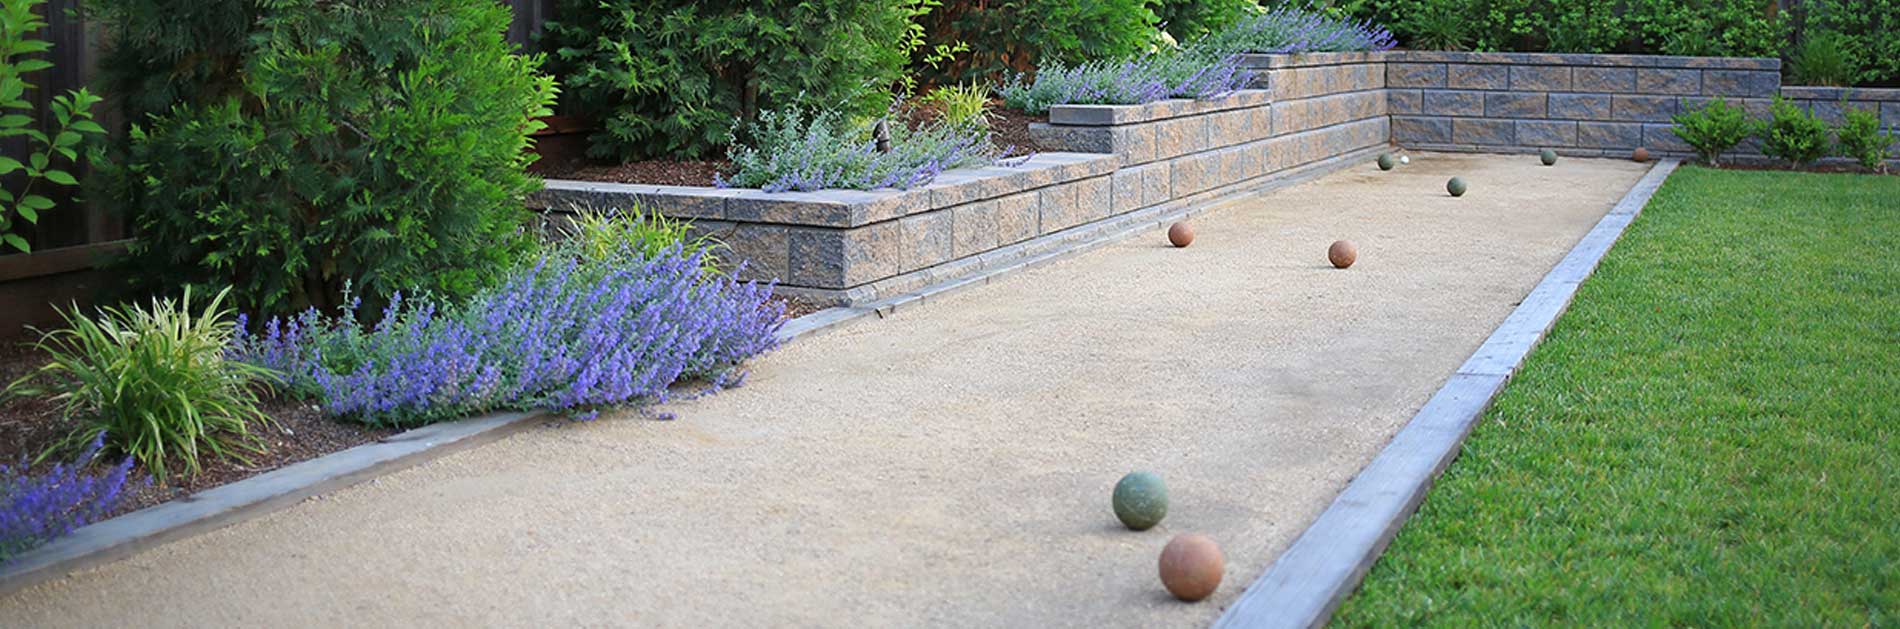 Bocce ball court and landscaped yard